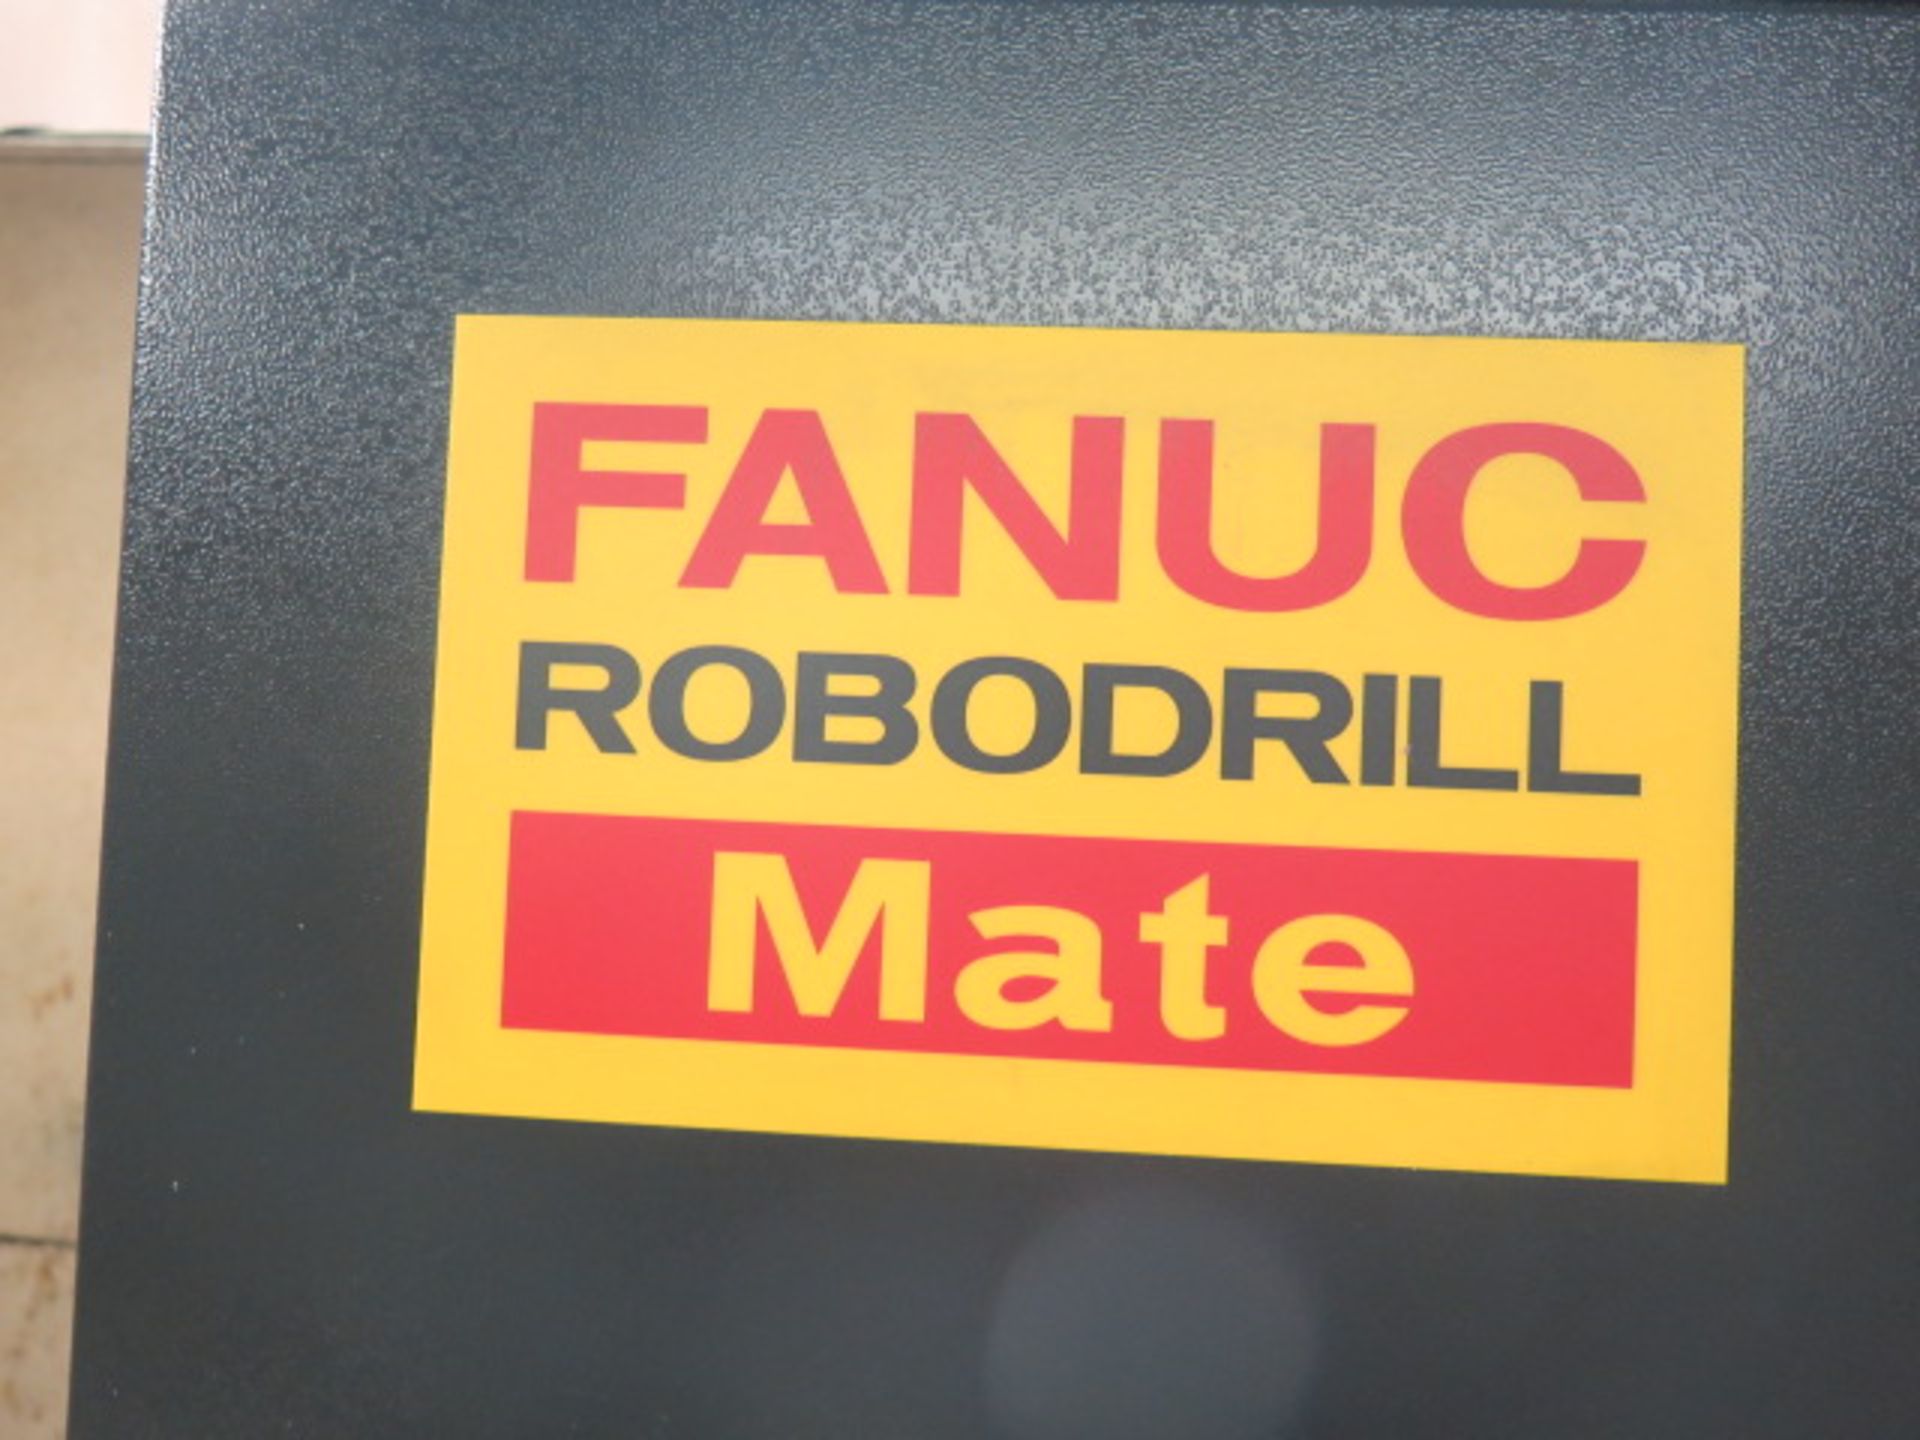 2006 Fanuc Robodrill MATE CNC Drill and Tapping Center s/n P068VN040 w/ Fanuc 0i-MC, SOLD AS IS - Image 3 of 13